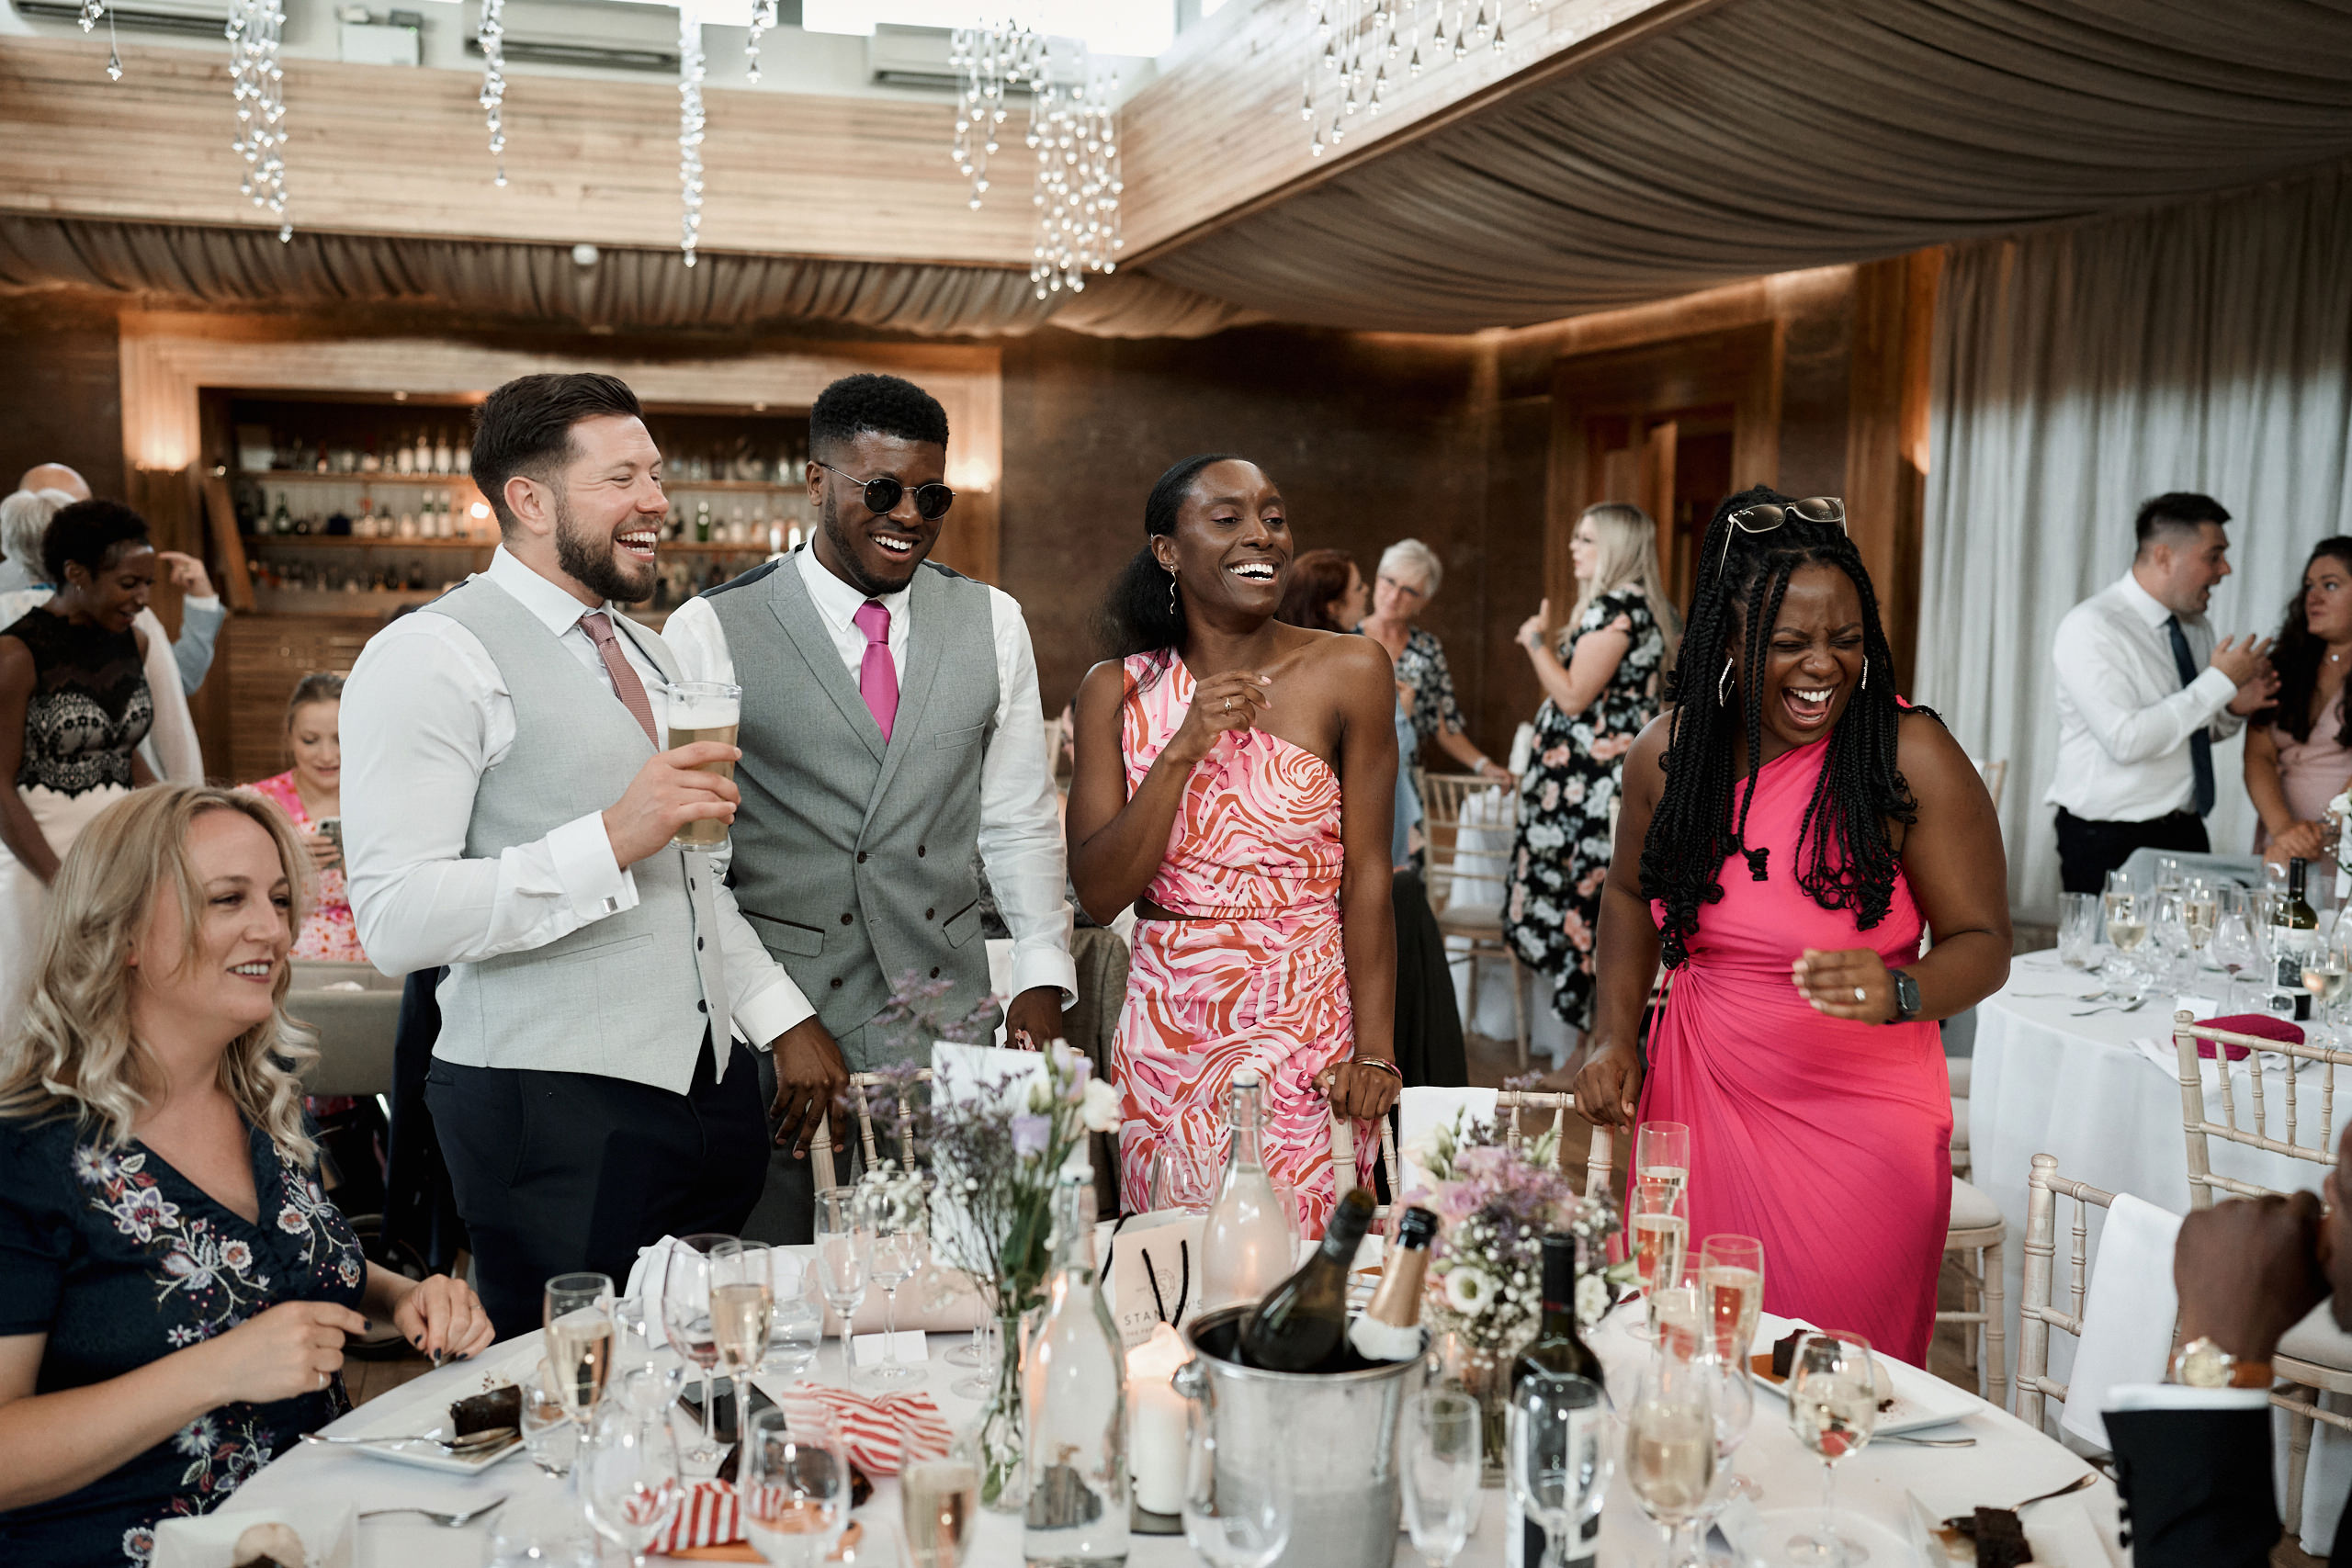 People are cracking up at a wedding party.